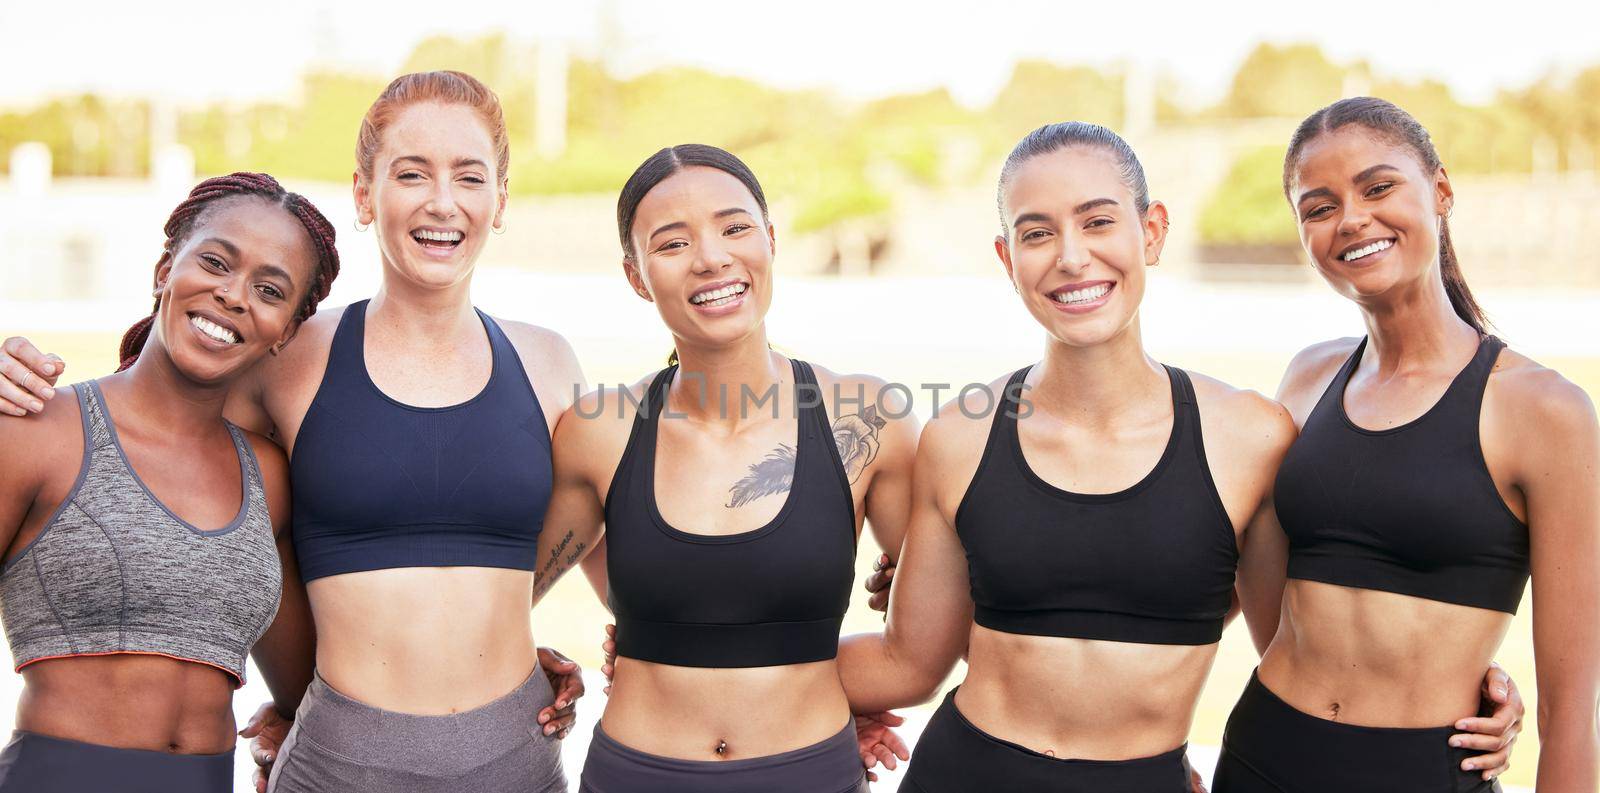 Fitness, portrait and happy running team on a runners racetrack for training, exercise and group workout as friends. Smile, Diversity and healthy girls with of slim, strong and athletic sports body.